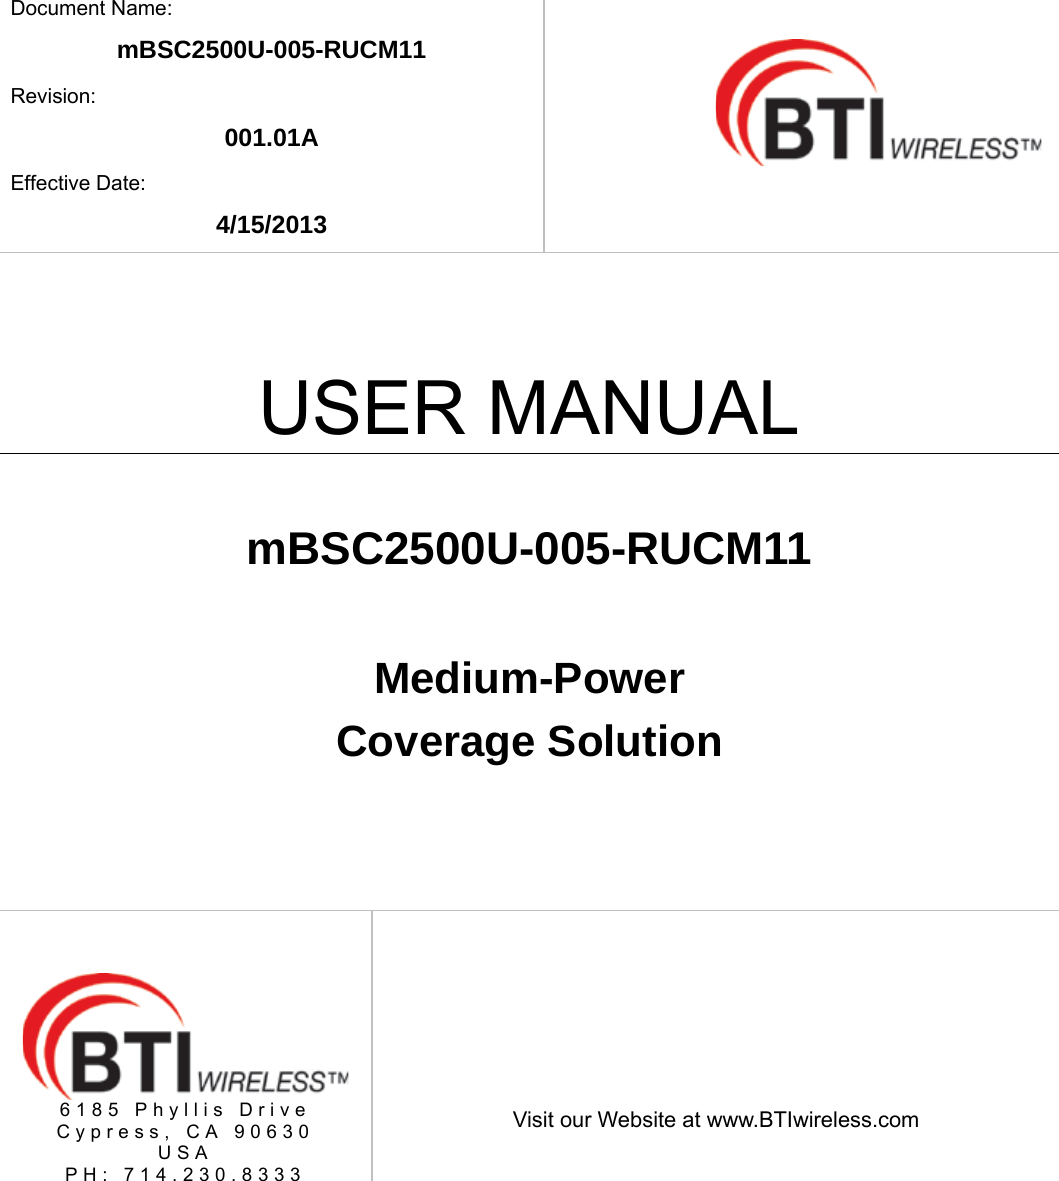    Document Name: mBSC2500U-005-RUCM11 Revision: 001.01A Effective Date: 4/15/2013   USER MANUAL  mBSC2500U-005-RUCM11  Medium-Power  Coverage Solution  6185 Phyllis Drive Cypress, CA 90630 USA PH: 714.230.8333   Visit our Website at www.BTIwireless.com 